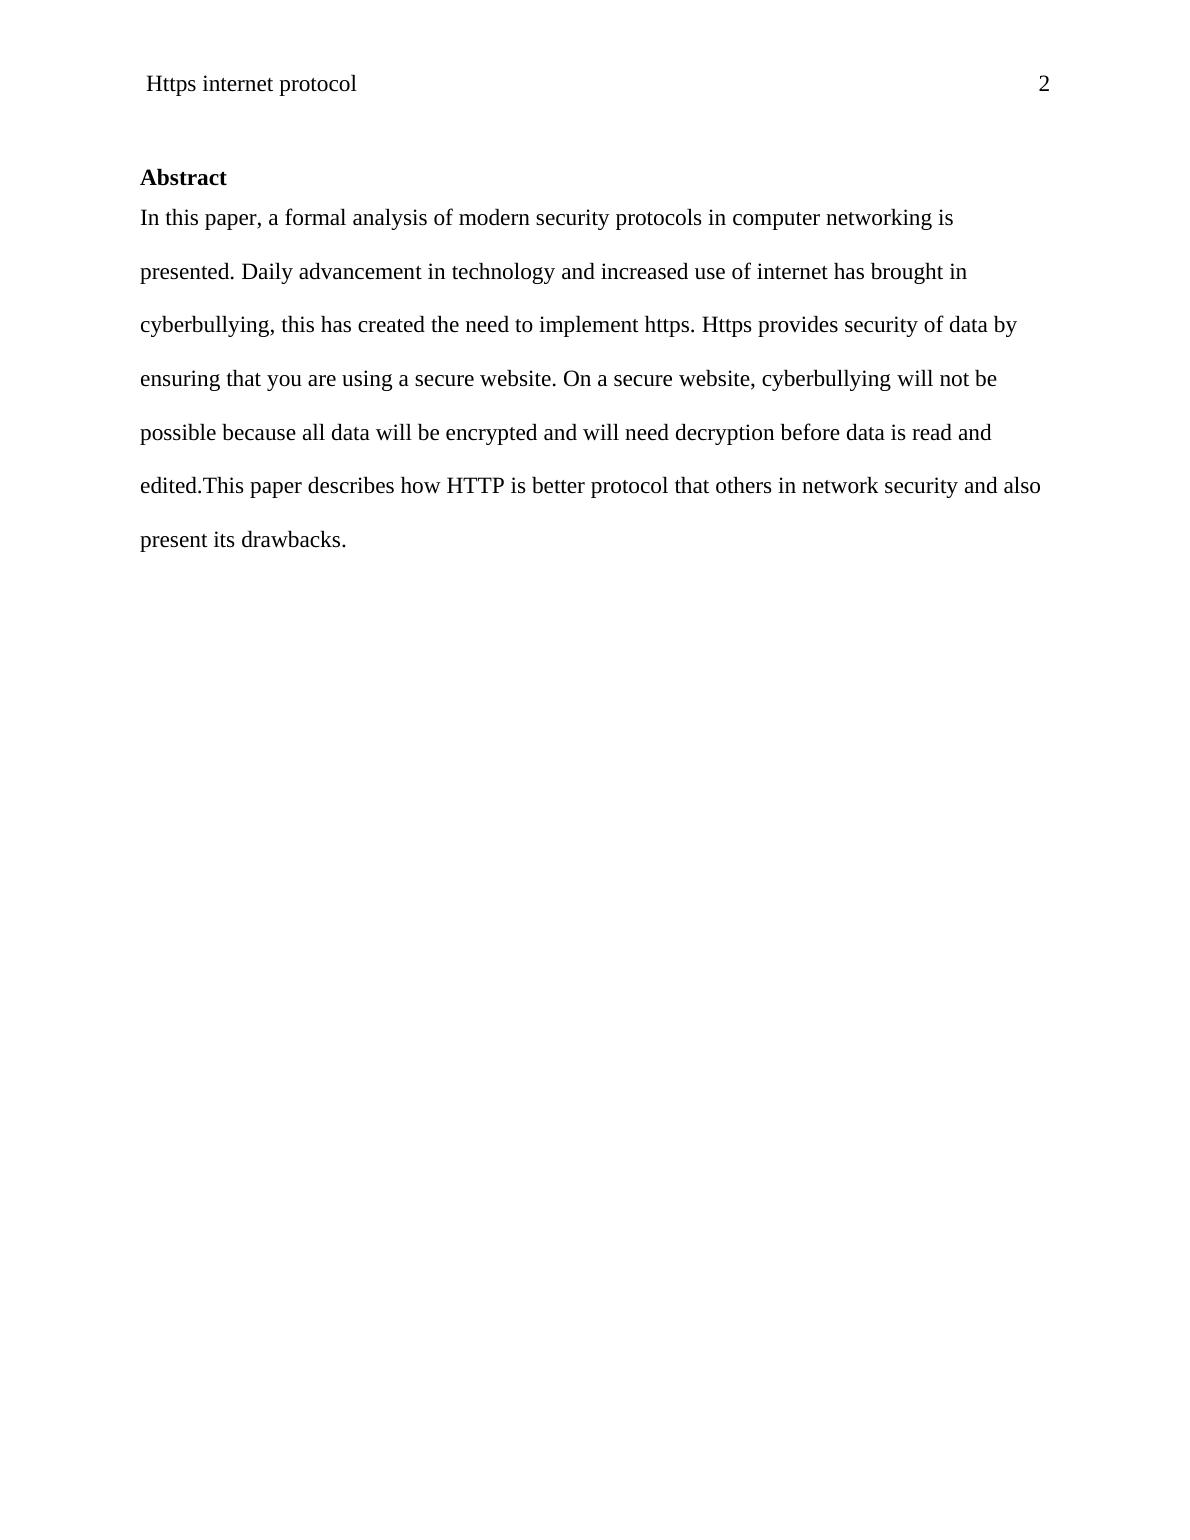 Hypertext Transfer Protocol Research Paper 2022_2